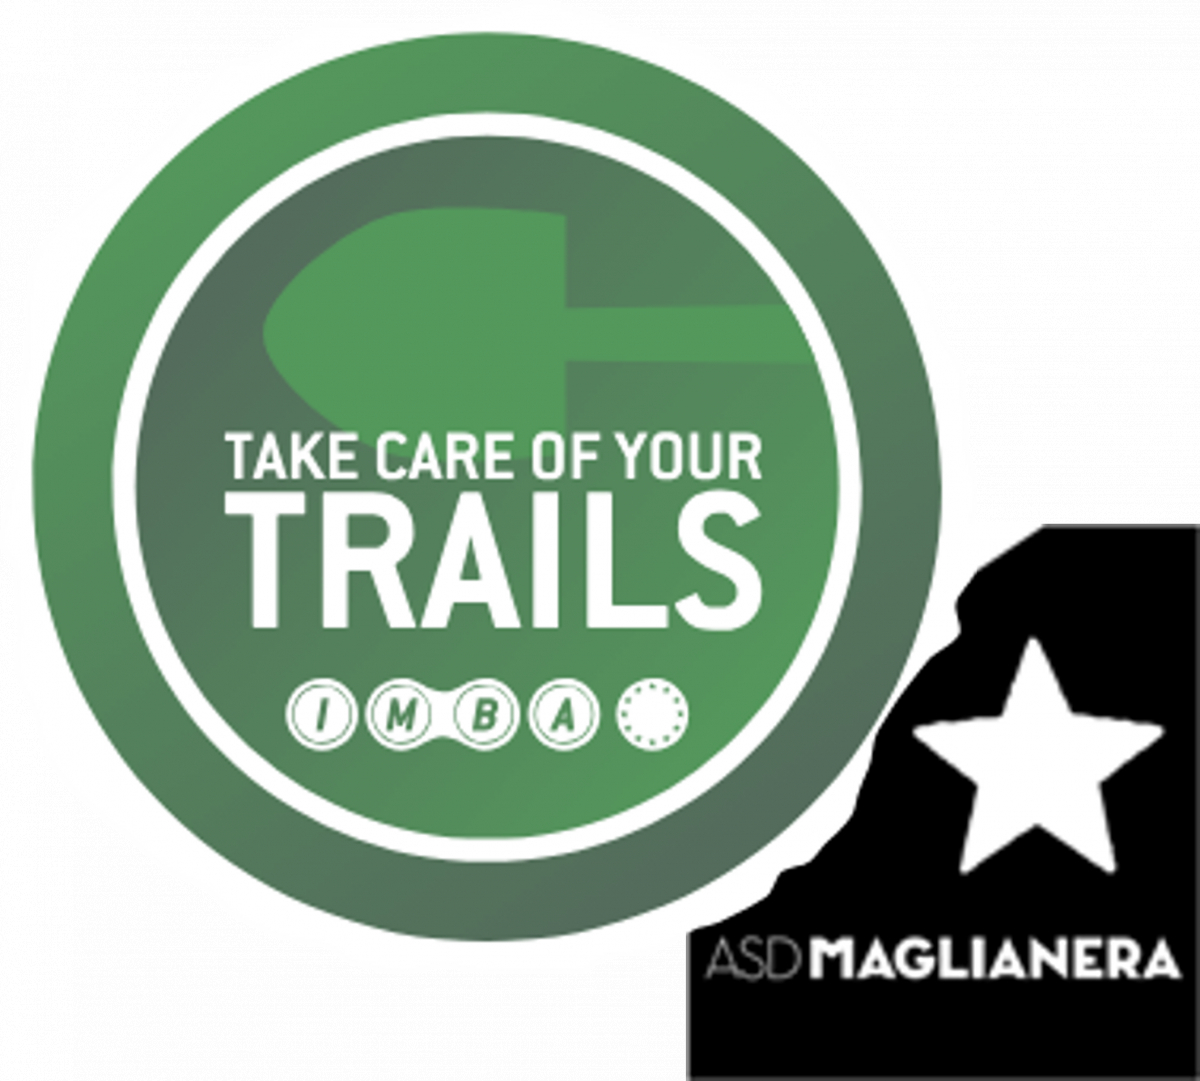 IMBA EUROPE. Take Care of Your Trails 2022. MAGLIANERA (MGNR)